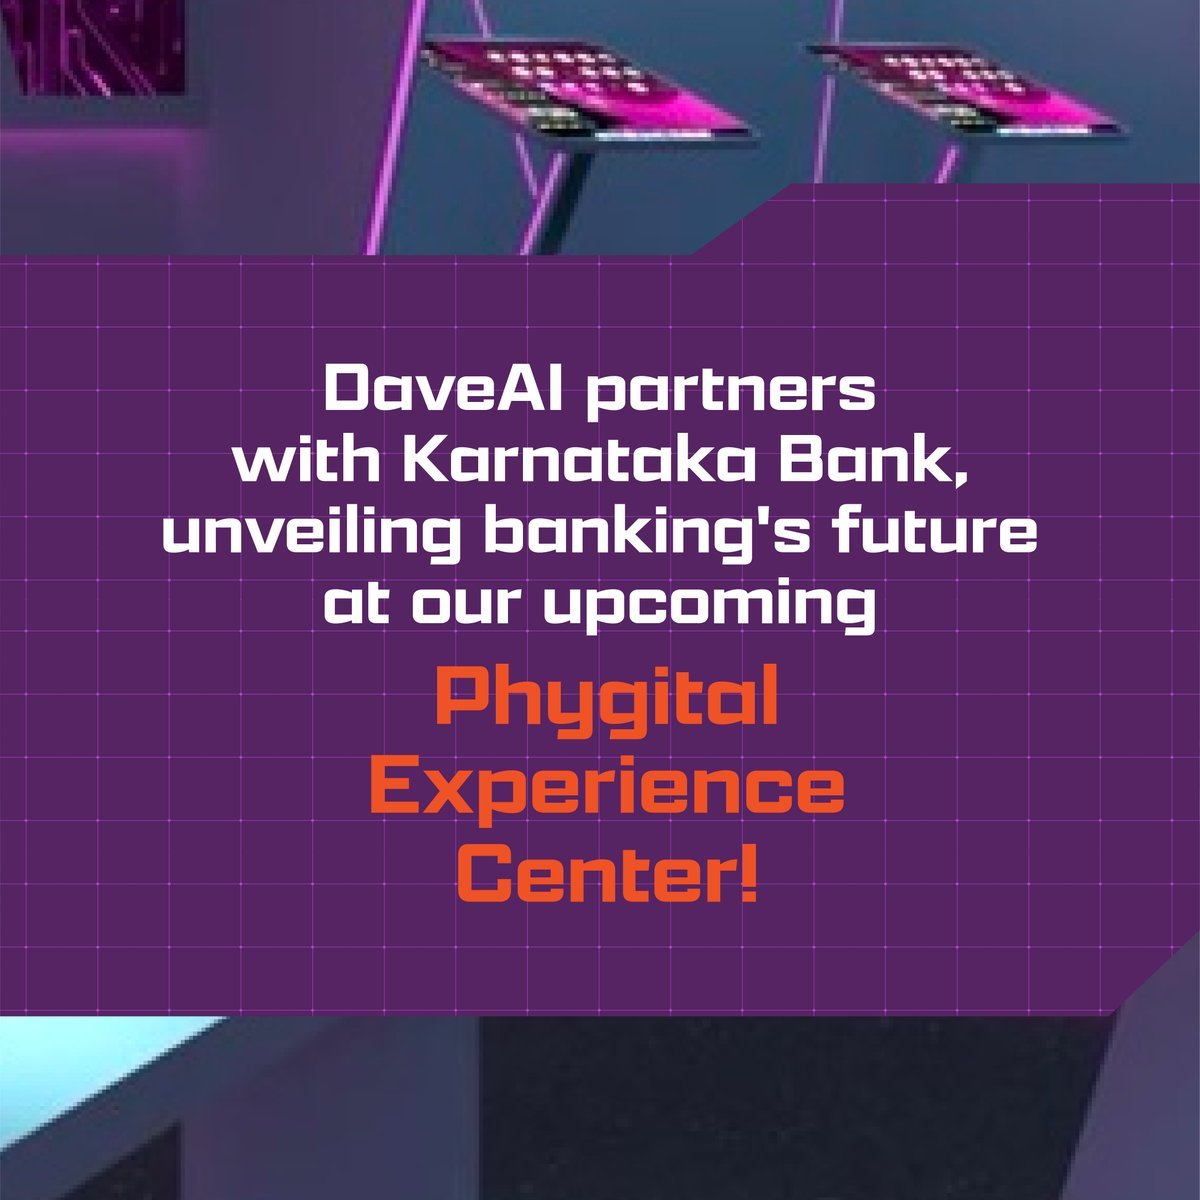 Stay tuned for more updates!

#banking #fintech #phygital #experiencecenter #bfsi #india